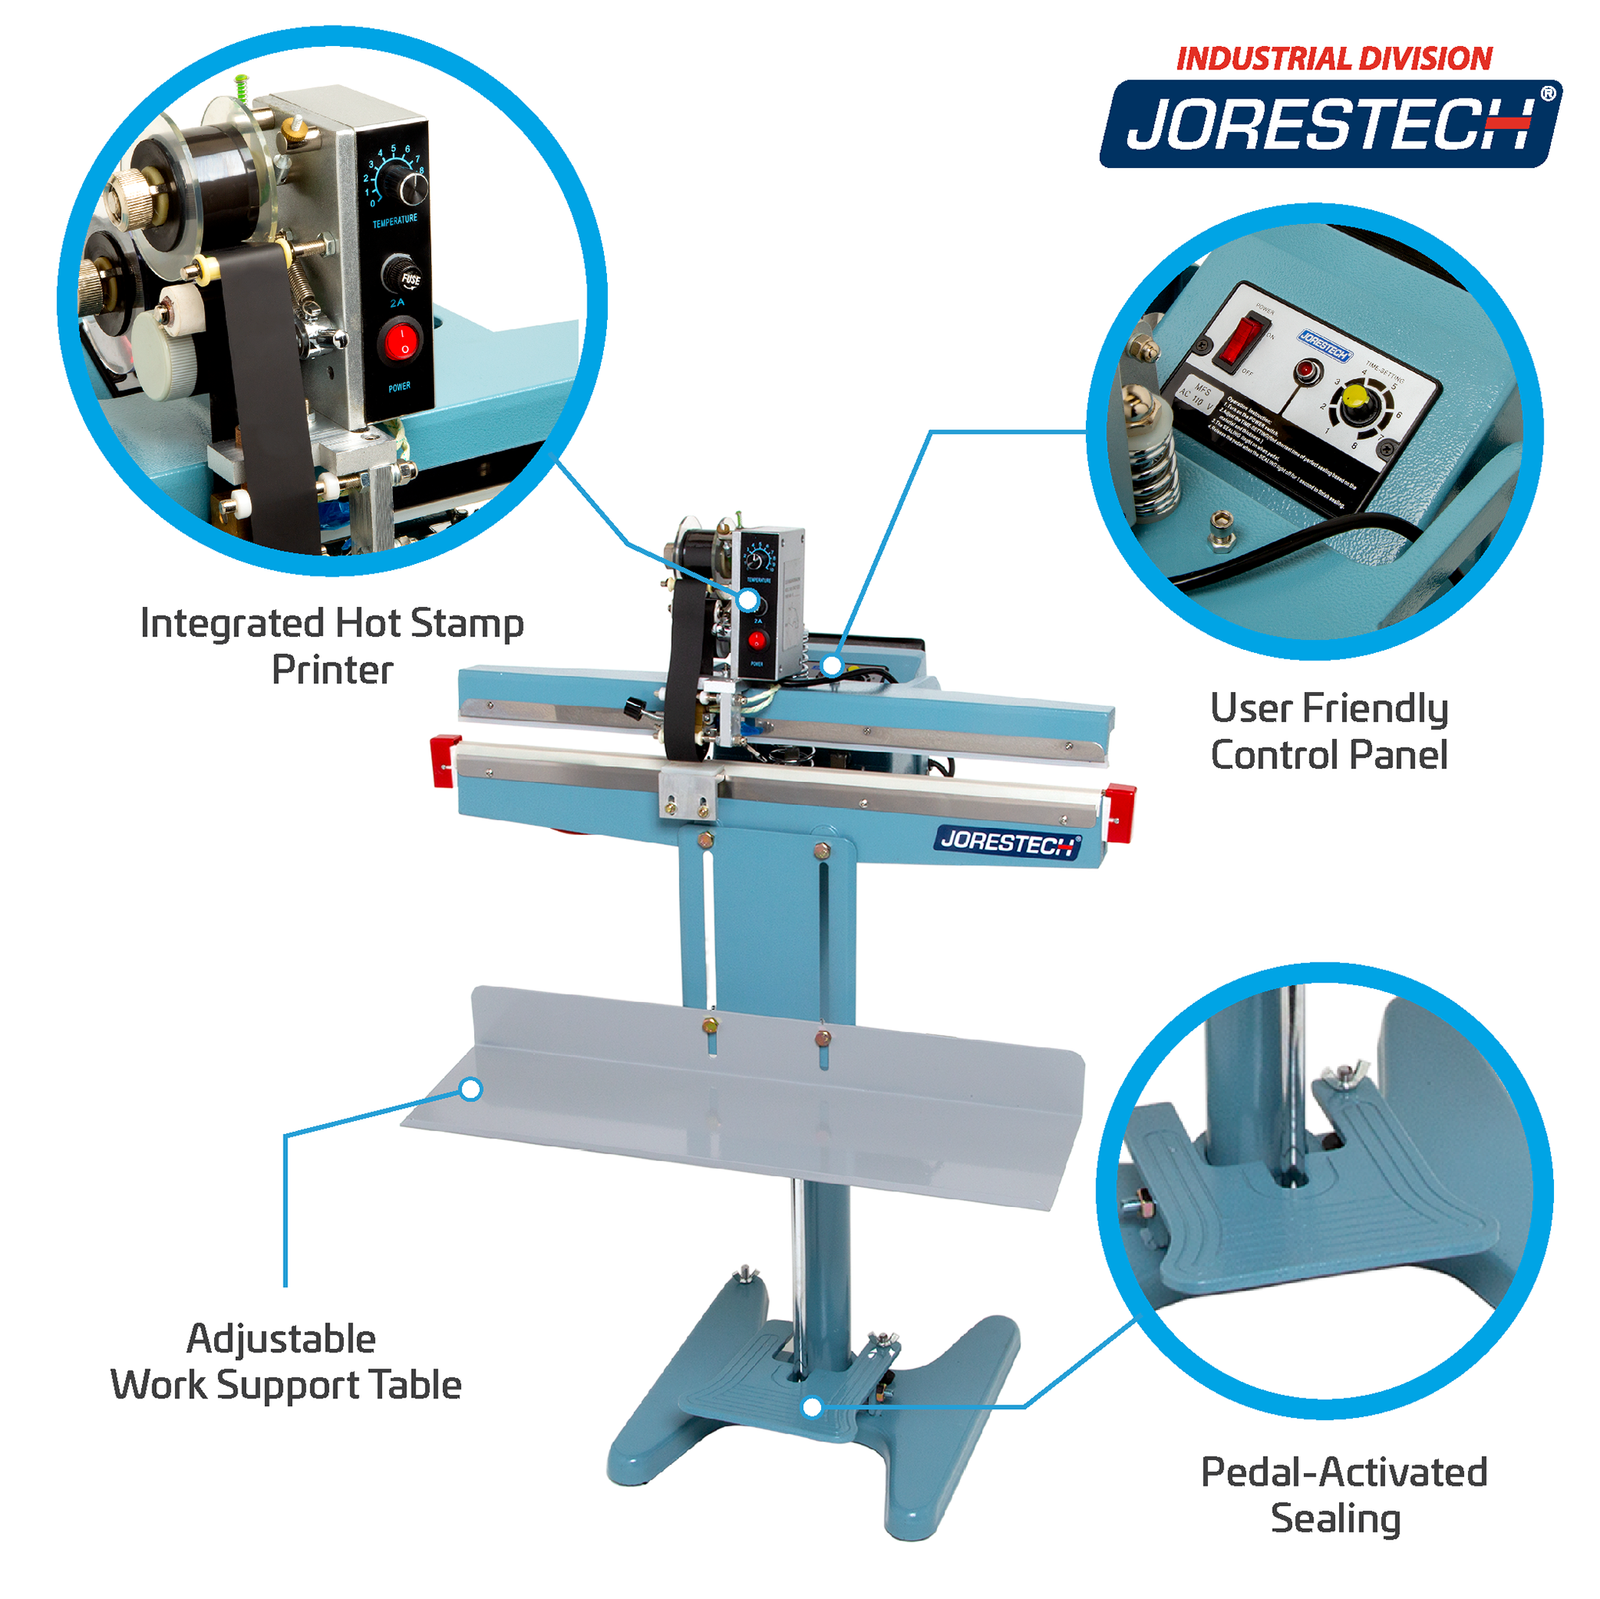 Infographic shows JORES TECHNOLOGIES® foot impulse bag sealer. Highlighted features include, Integrated Hot Stamp Printer, User Friendly Control Panel, Pedal-Activated Sealing, and Adjustable Work Support Table. Close-ups of hot stamp printer, foot pedal, and control panel